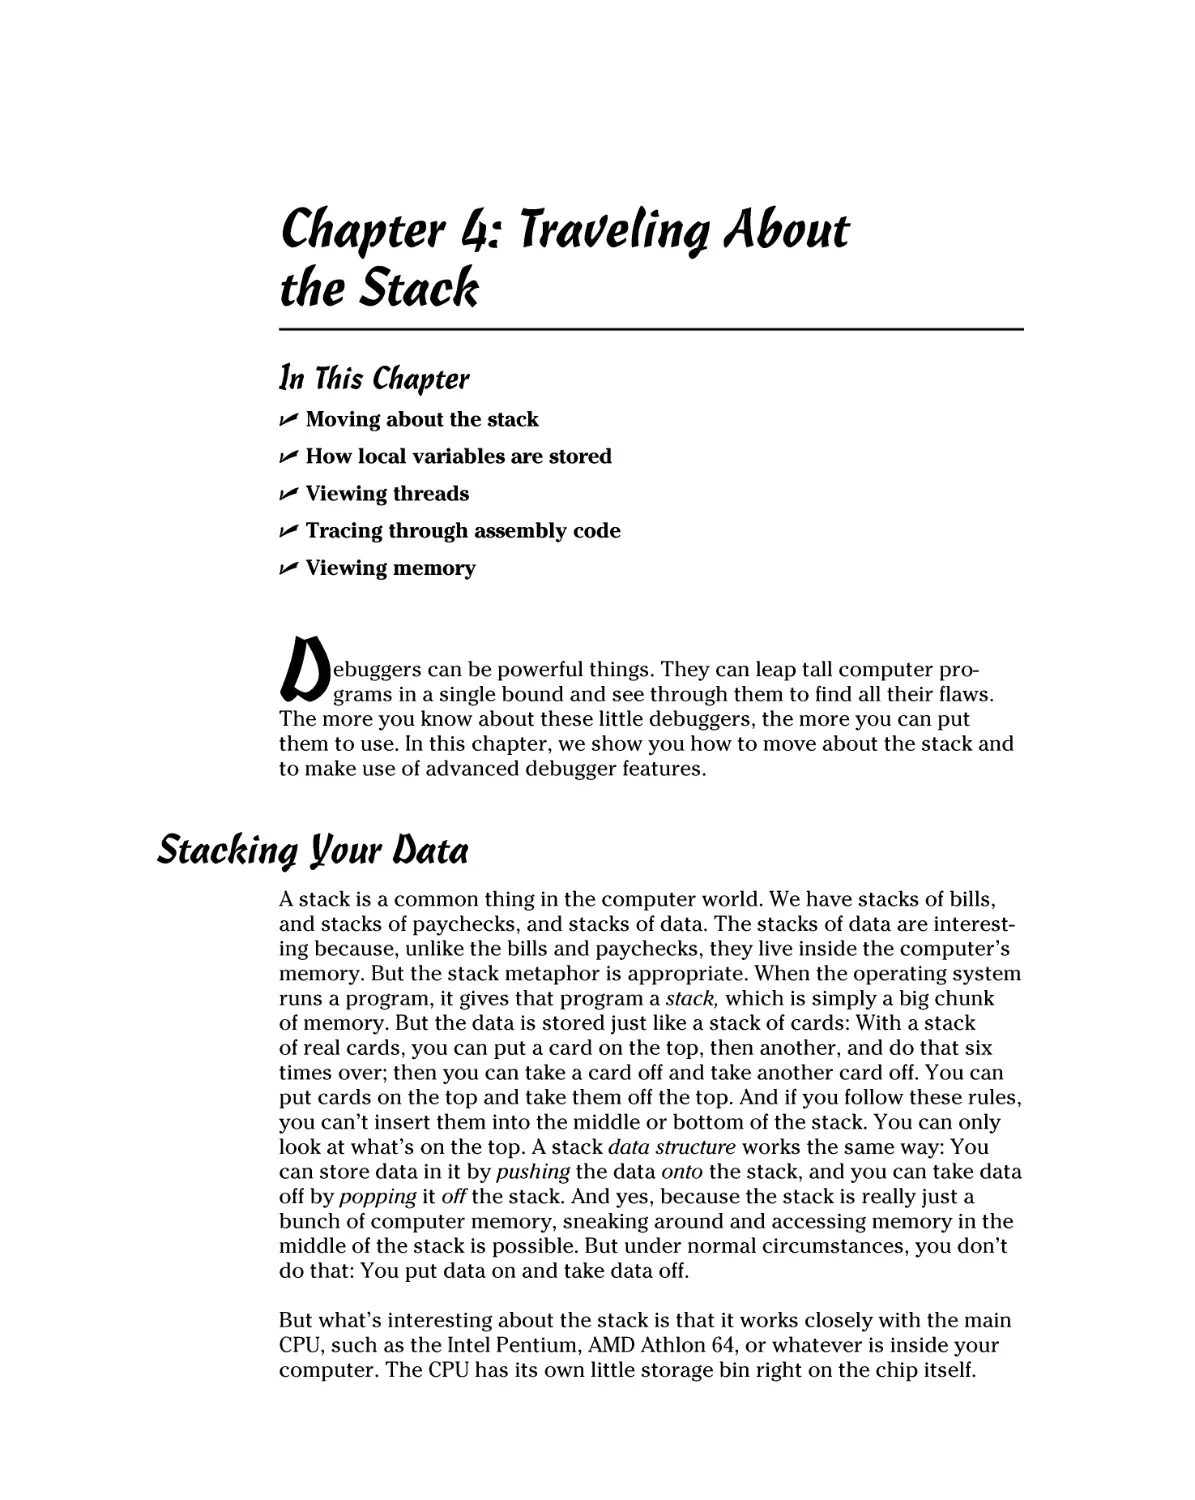 Chapter 4
Stacking Your Data